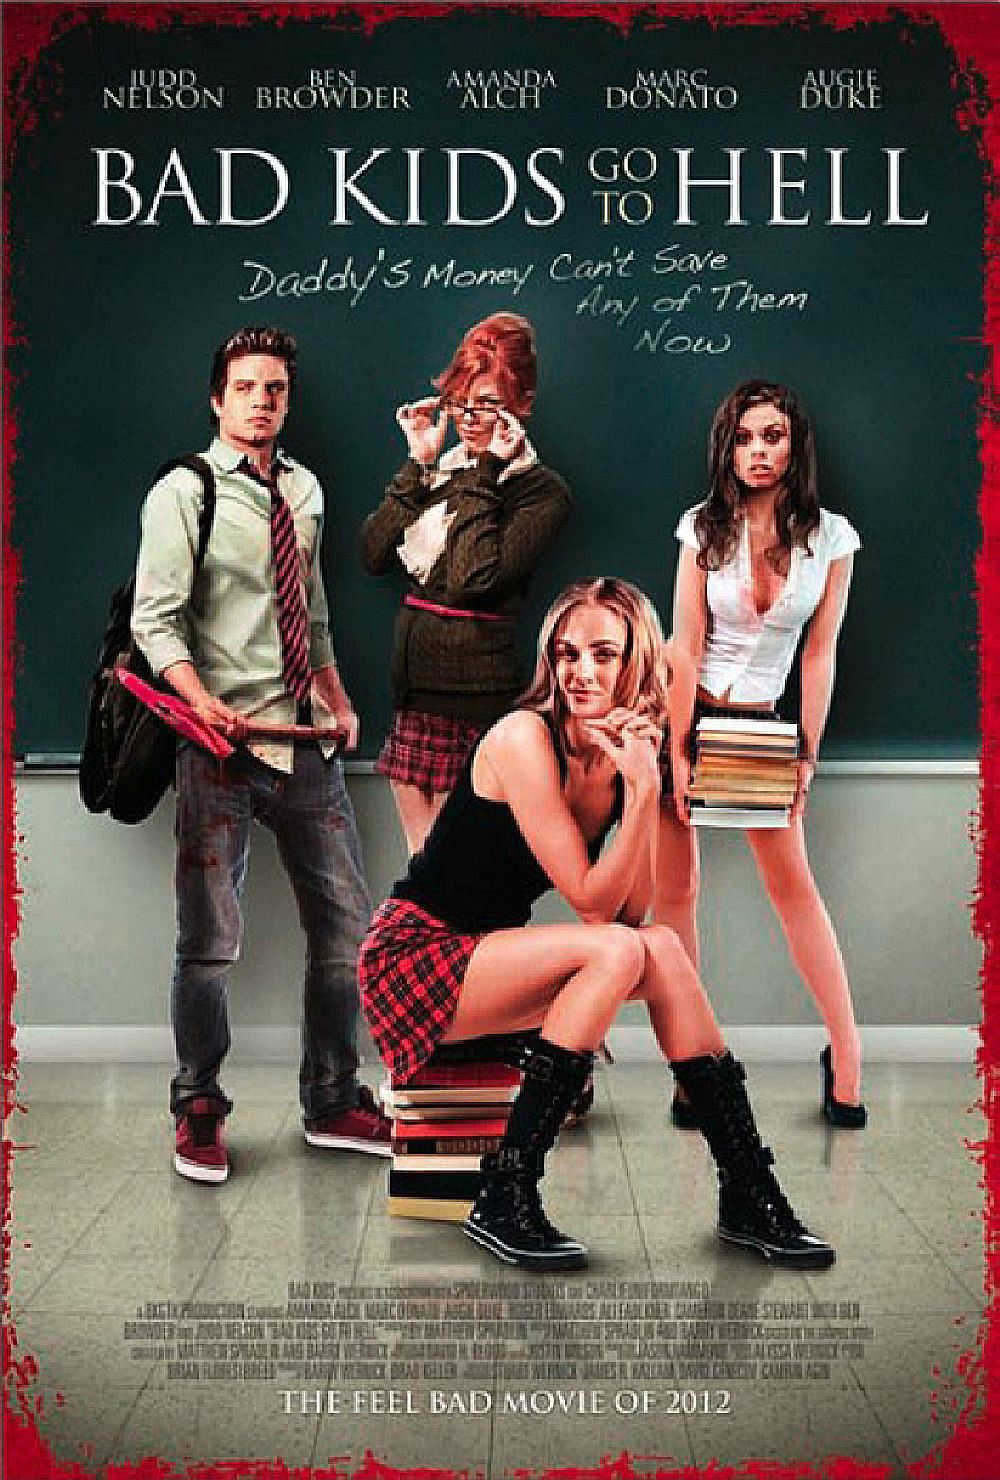 Hell go to bad kids Film Review: